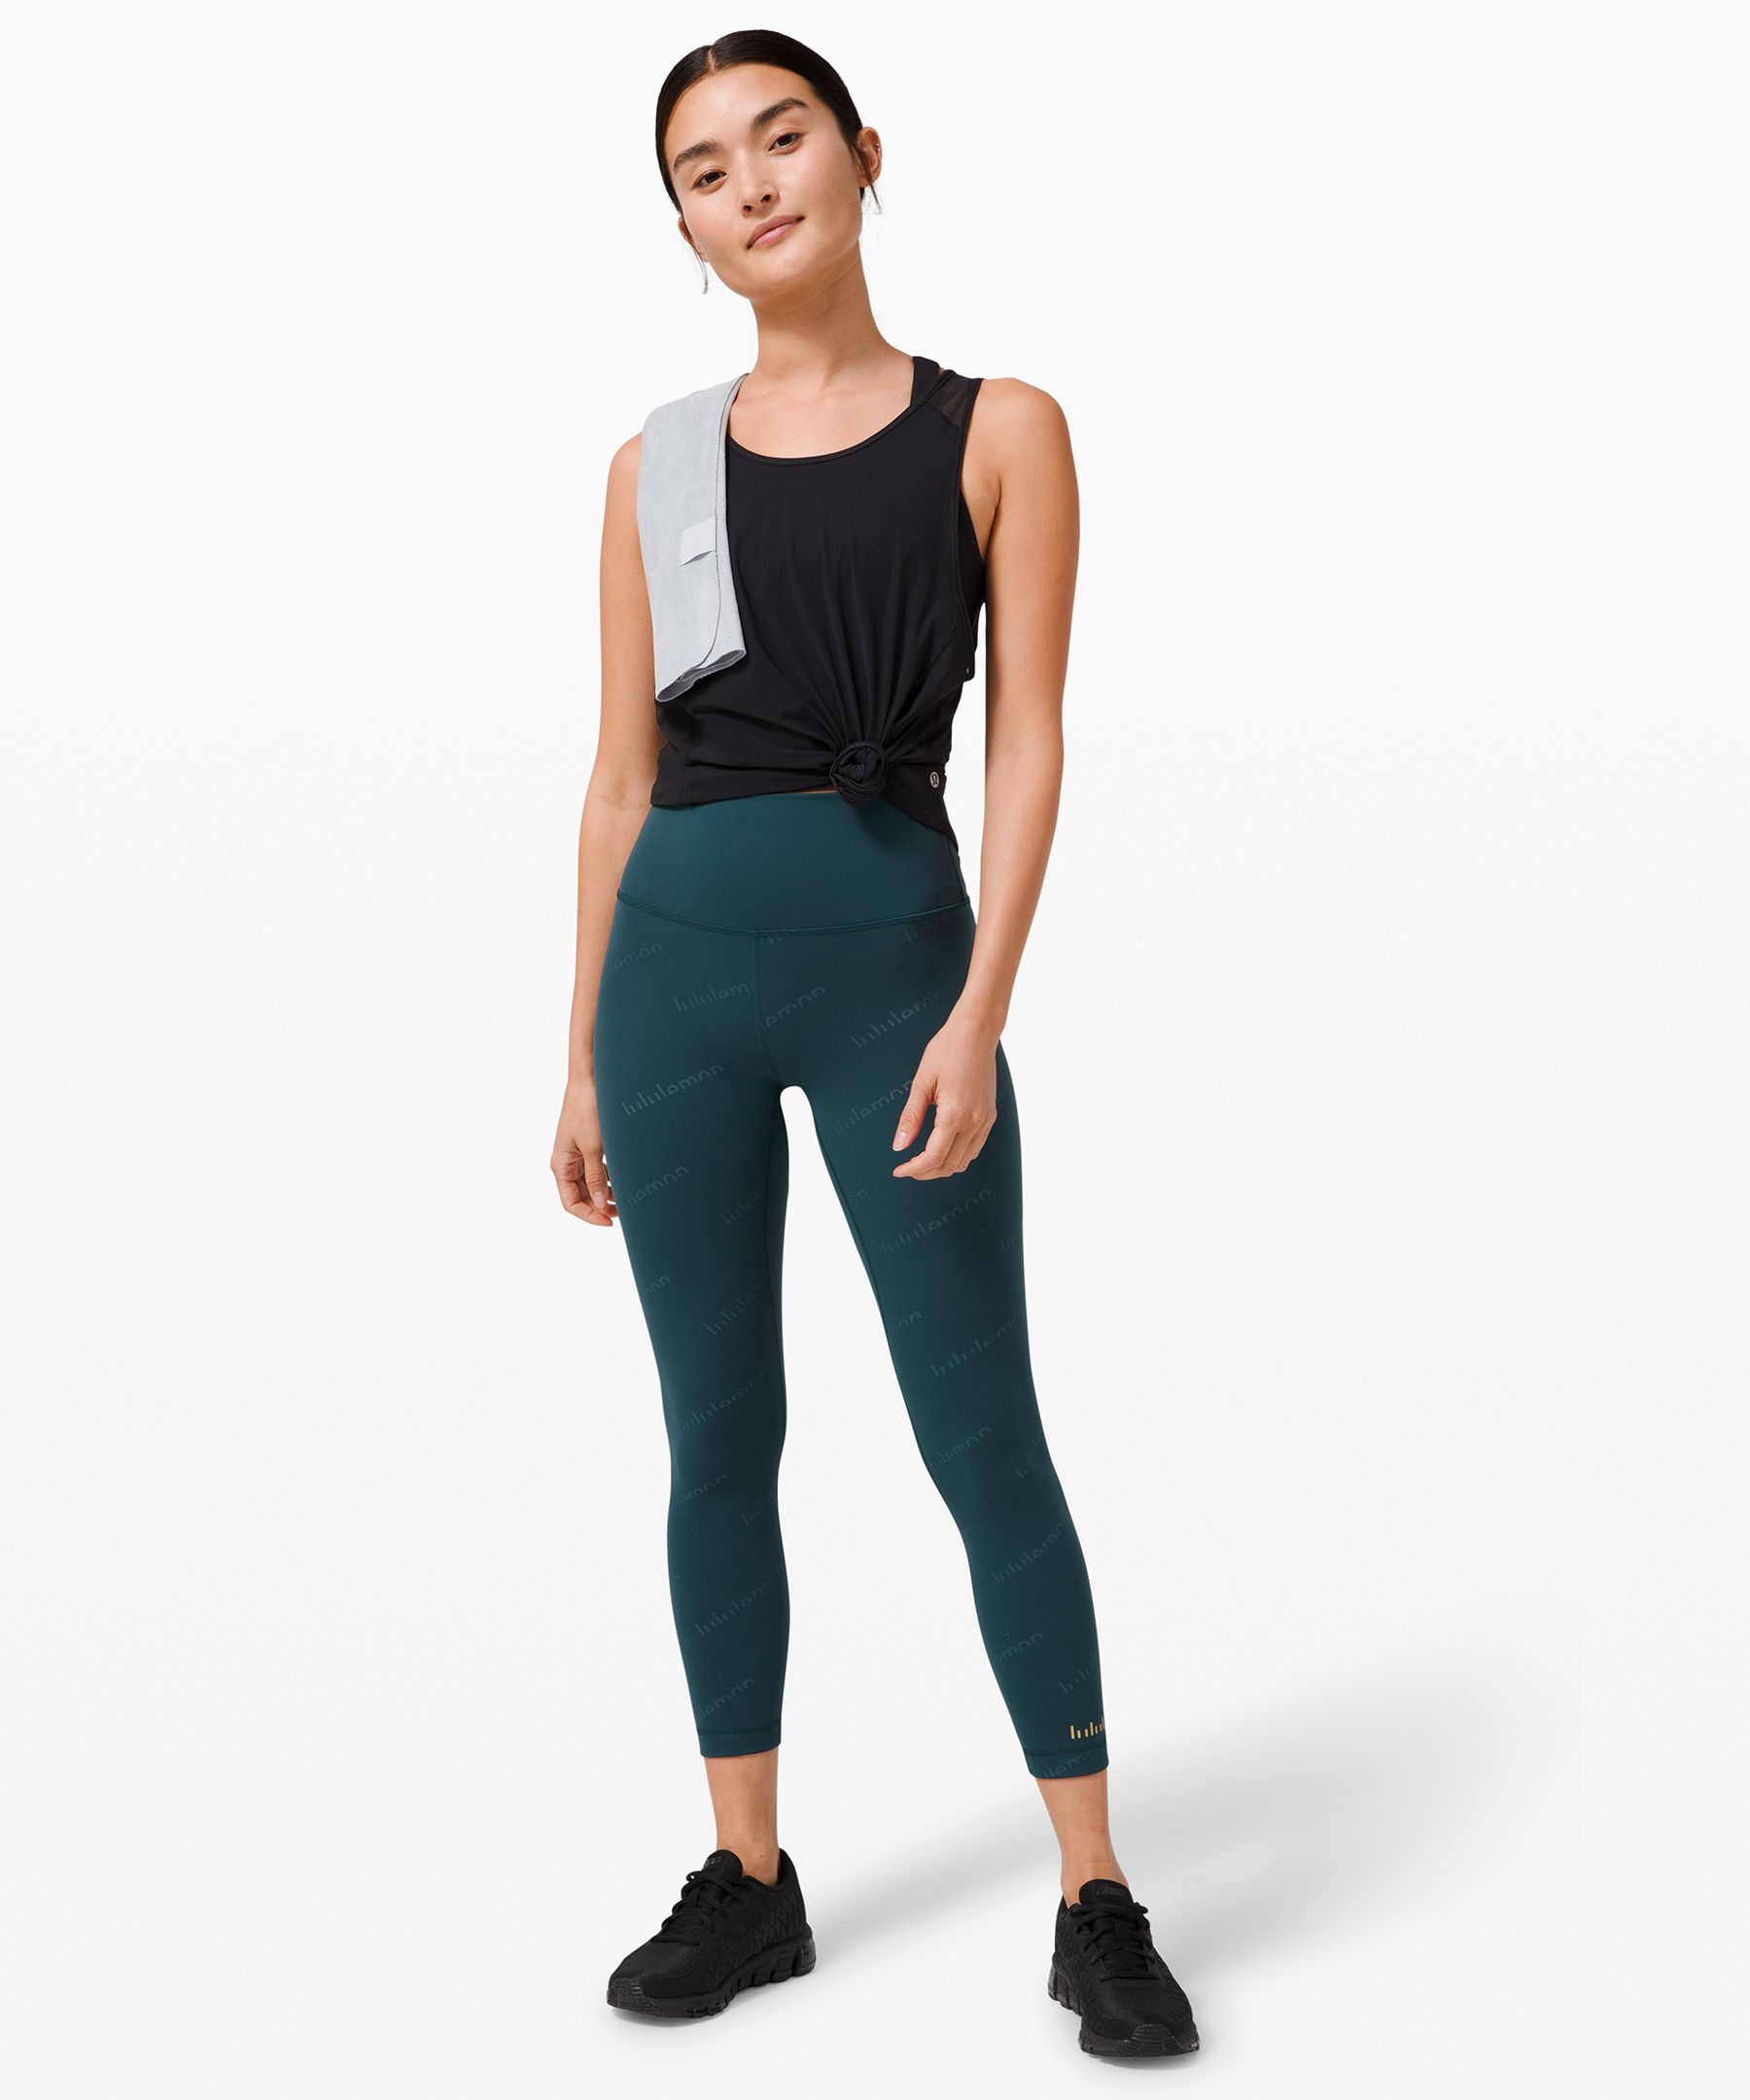 Lululemon's Black Friday sale 2021 is spectacular — up to 40